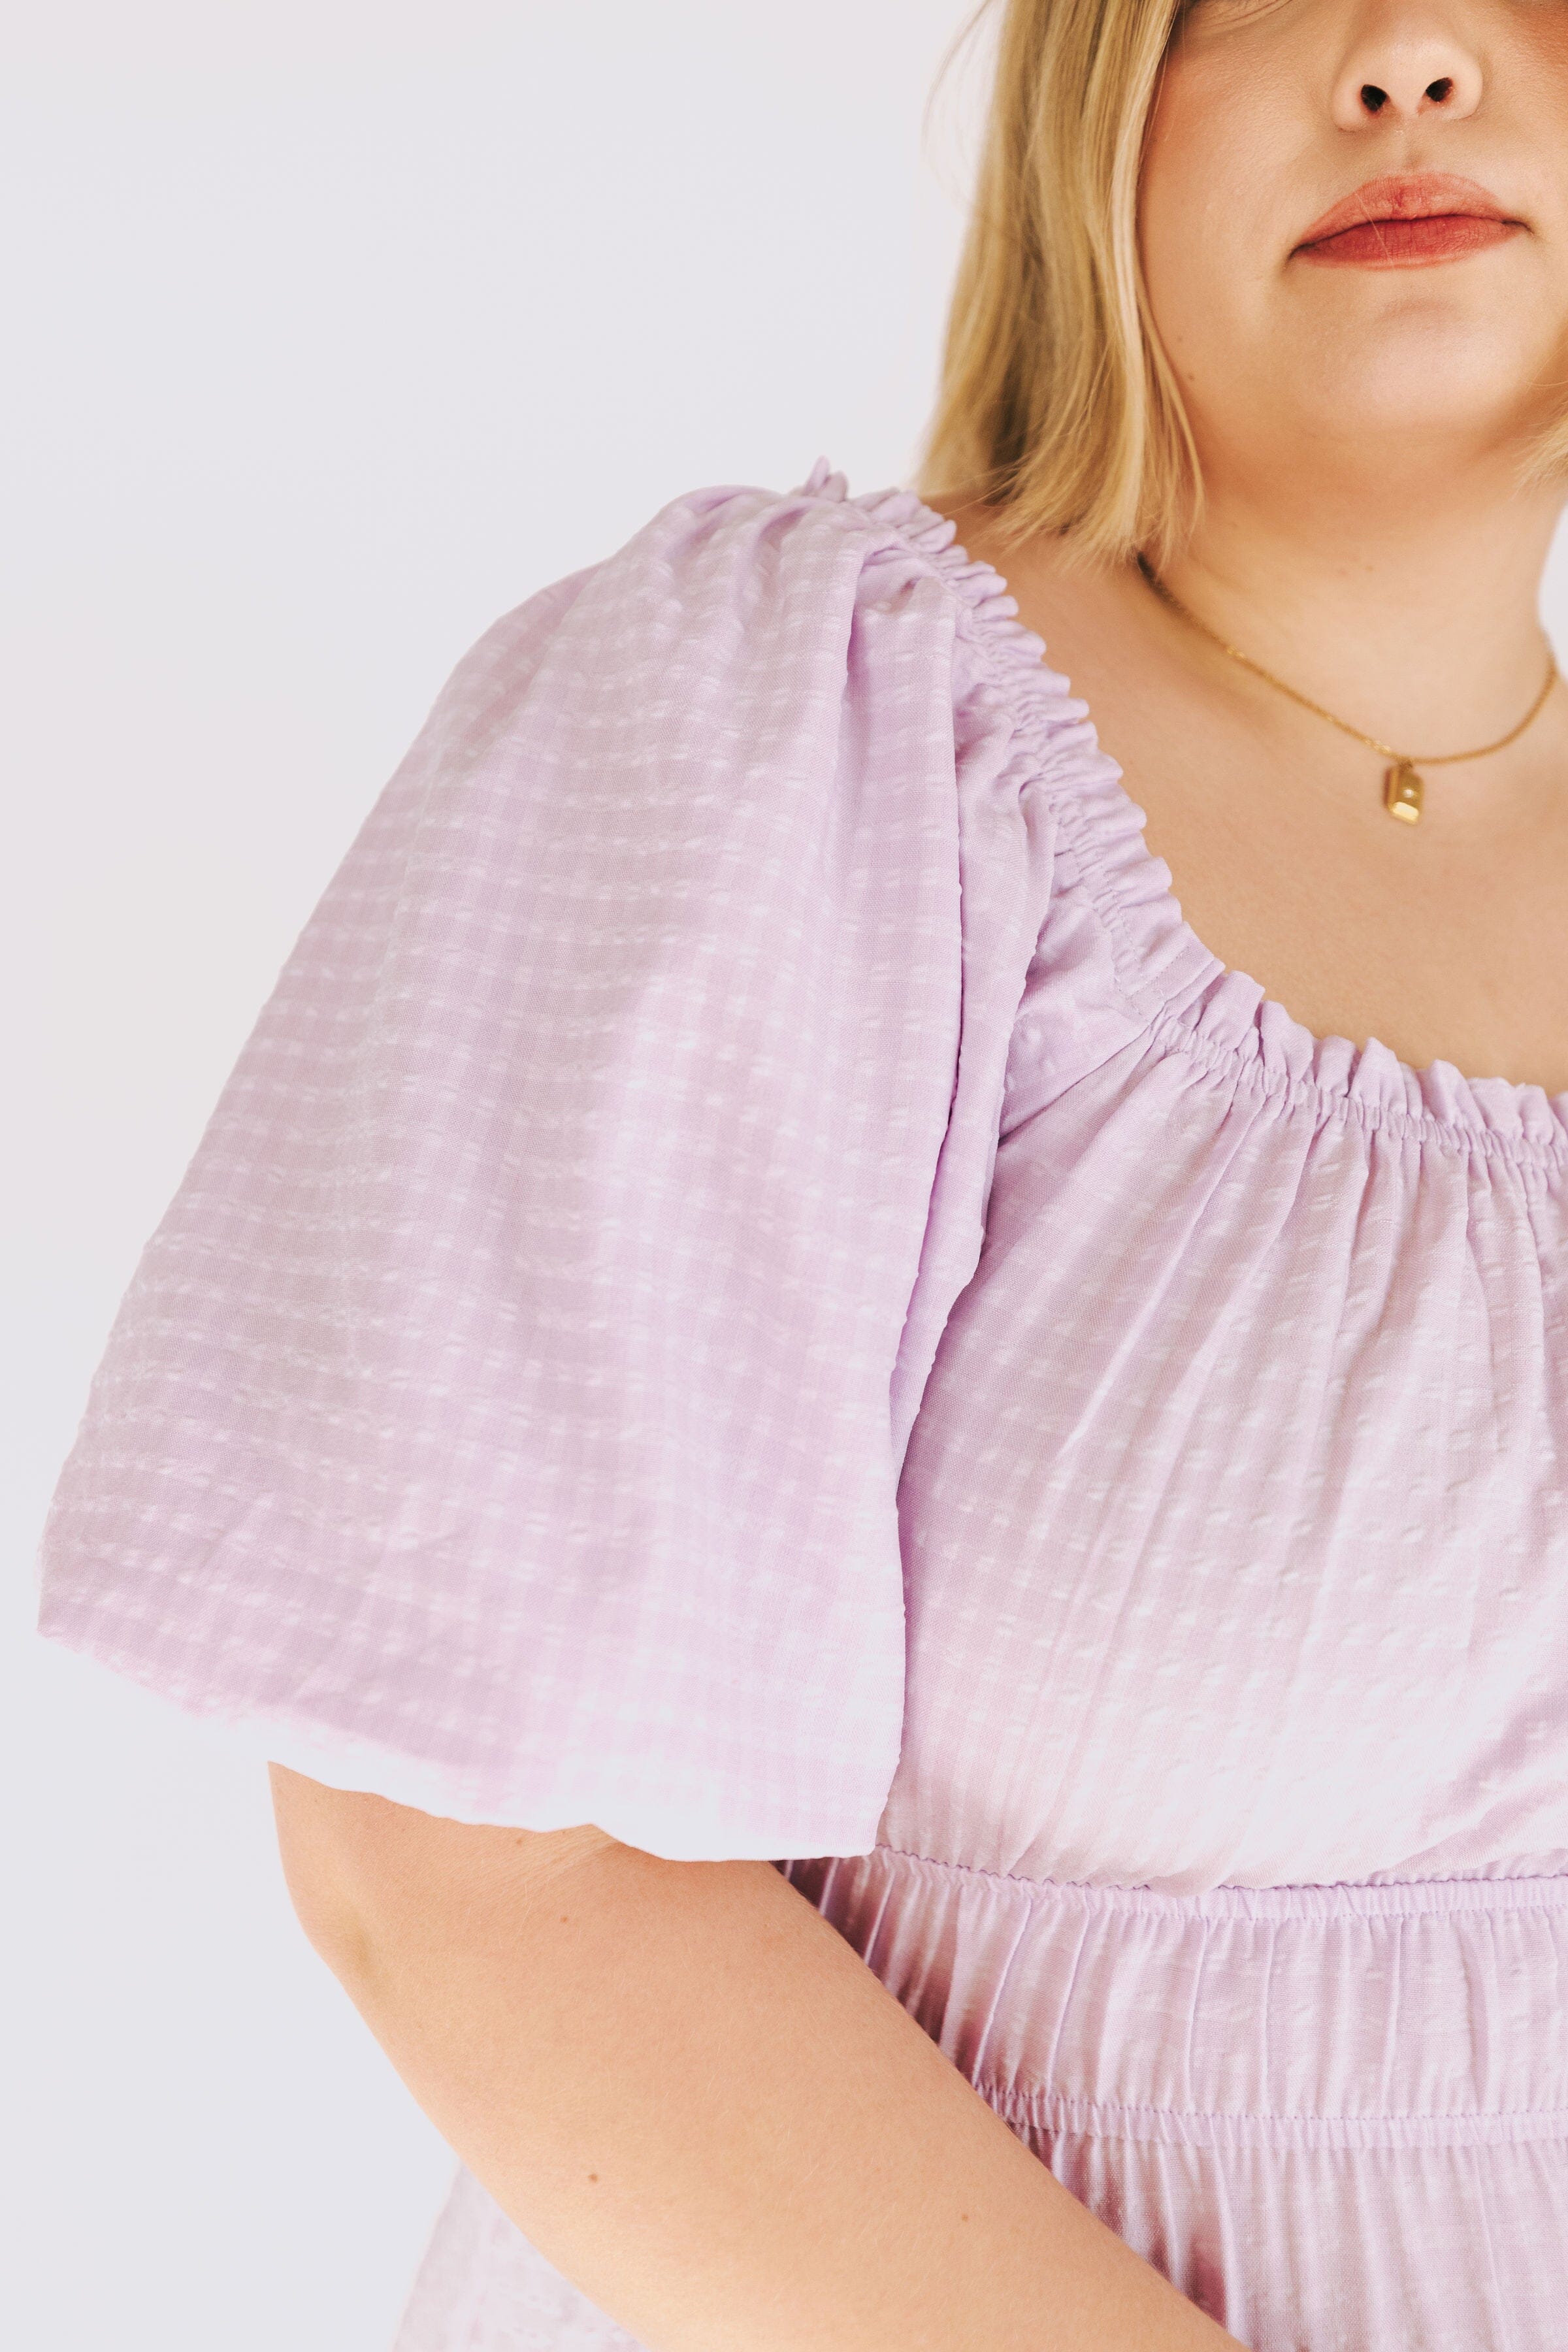 PLUS SIZE - Every Side Of You Dress